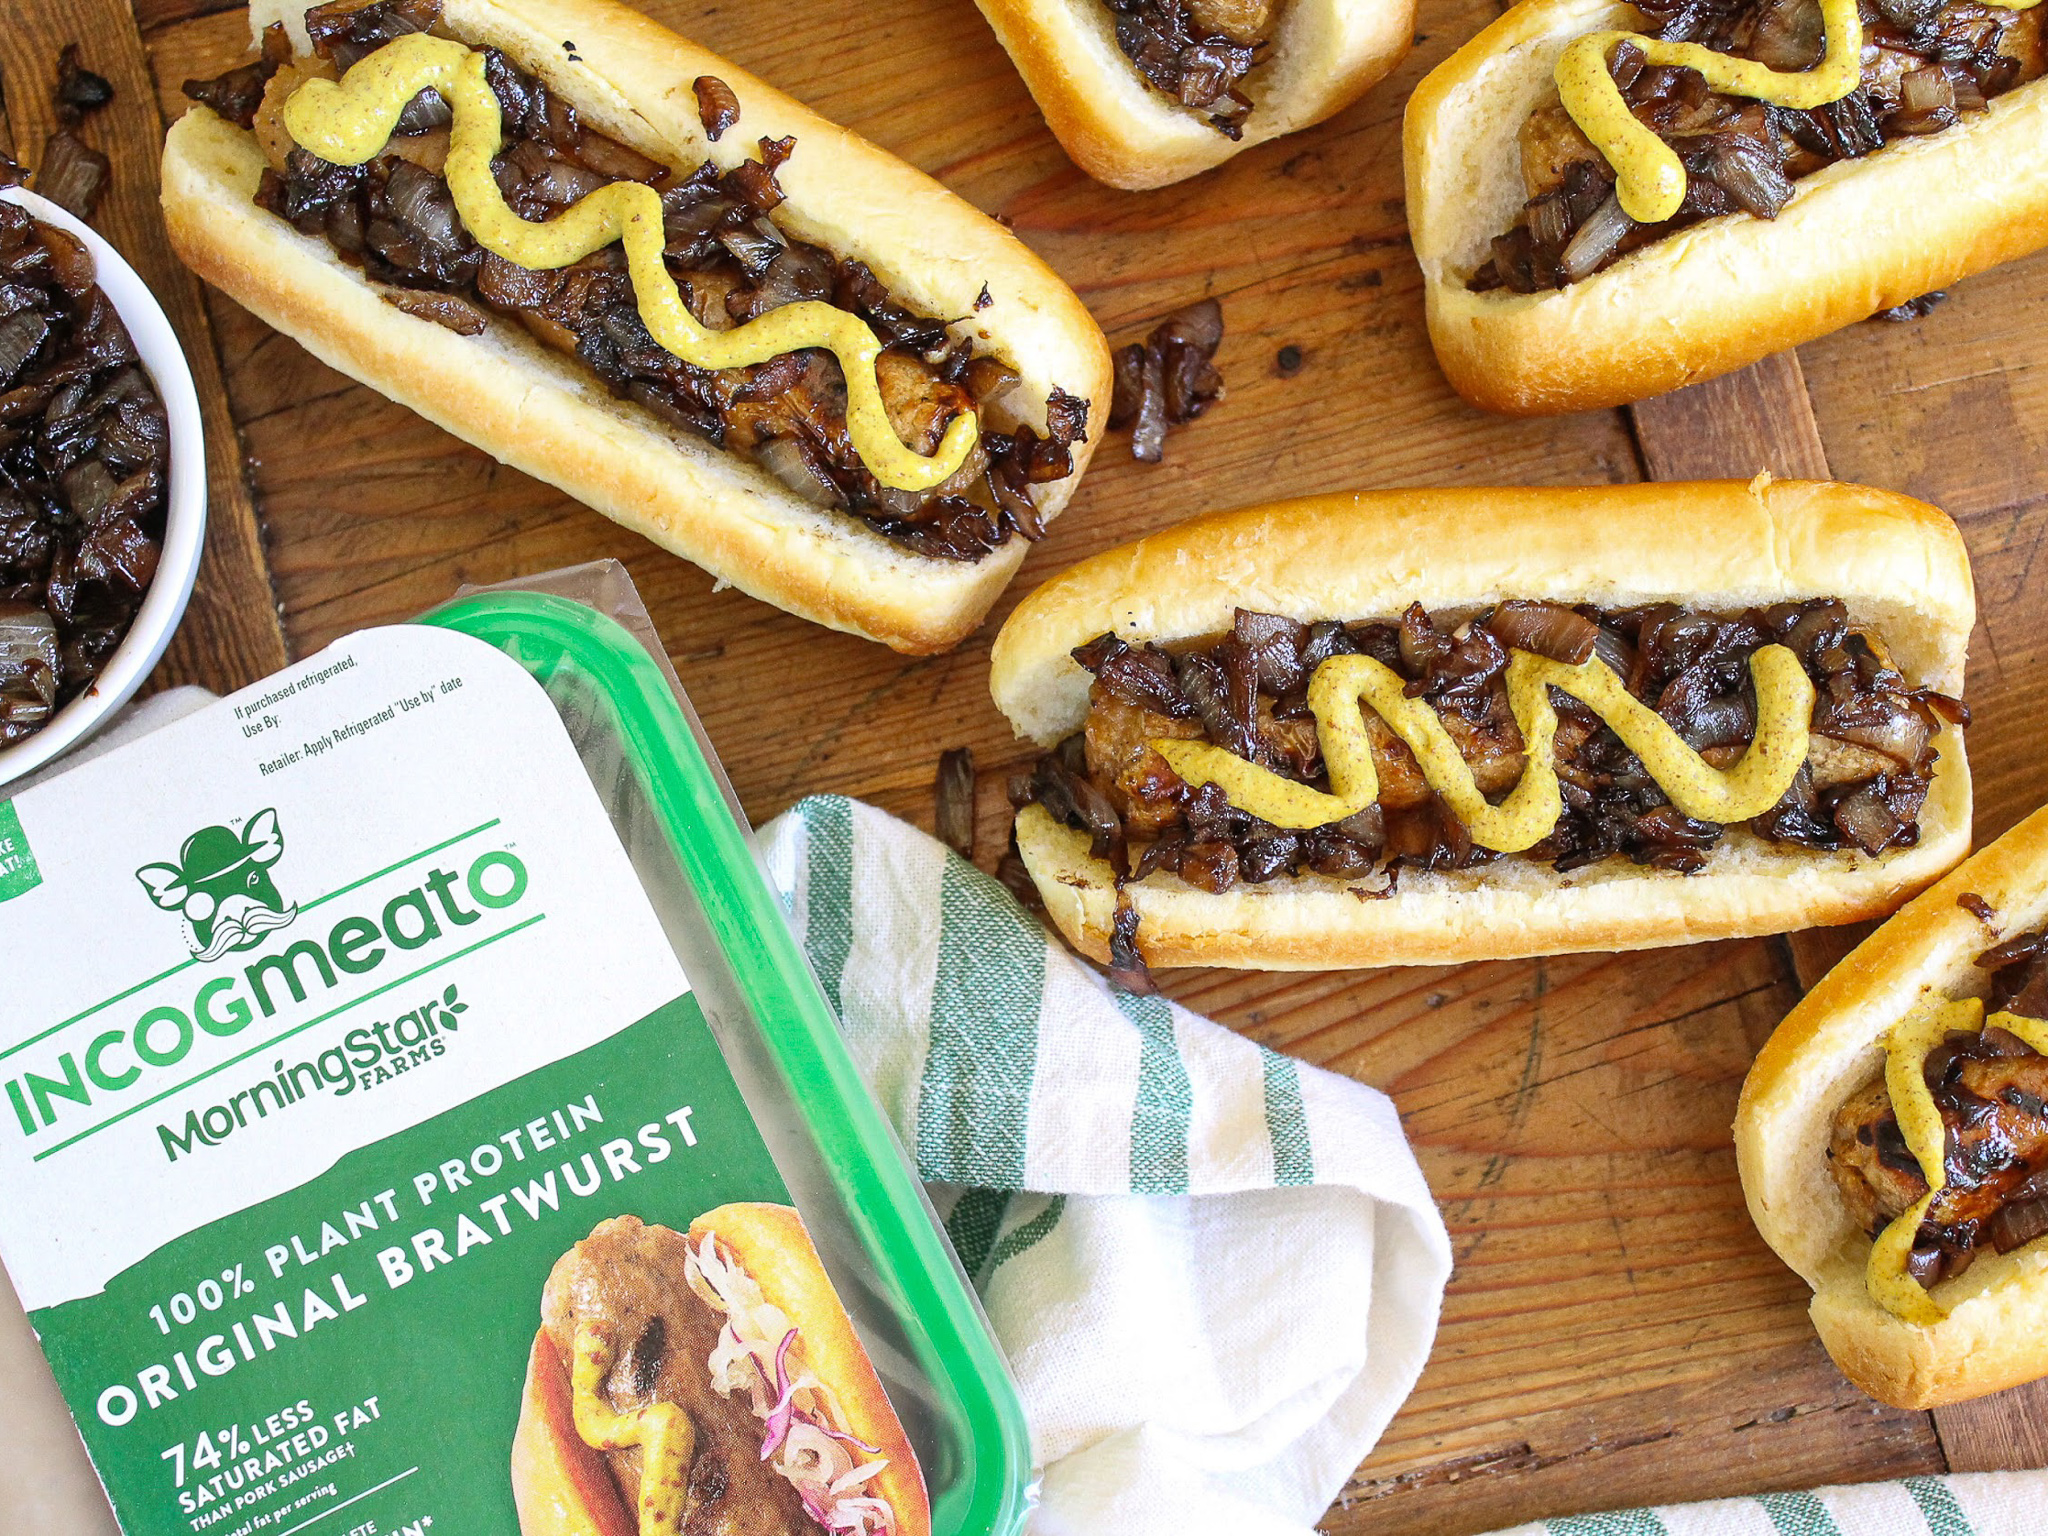 Incogmeato Bratwurst and Italian Sausage Products Are Available At Select Publix Stores - Tasty, Juicy And 100% Plant Based! on I Heart Publix